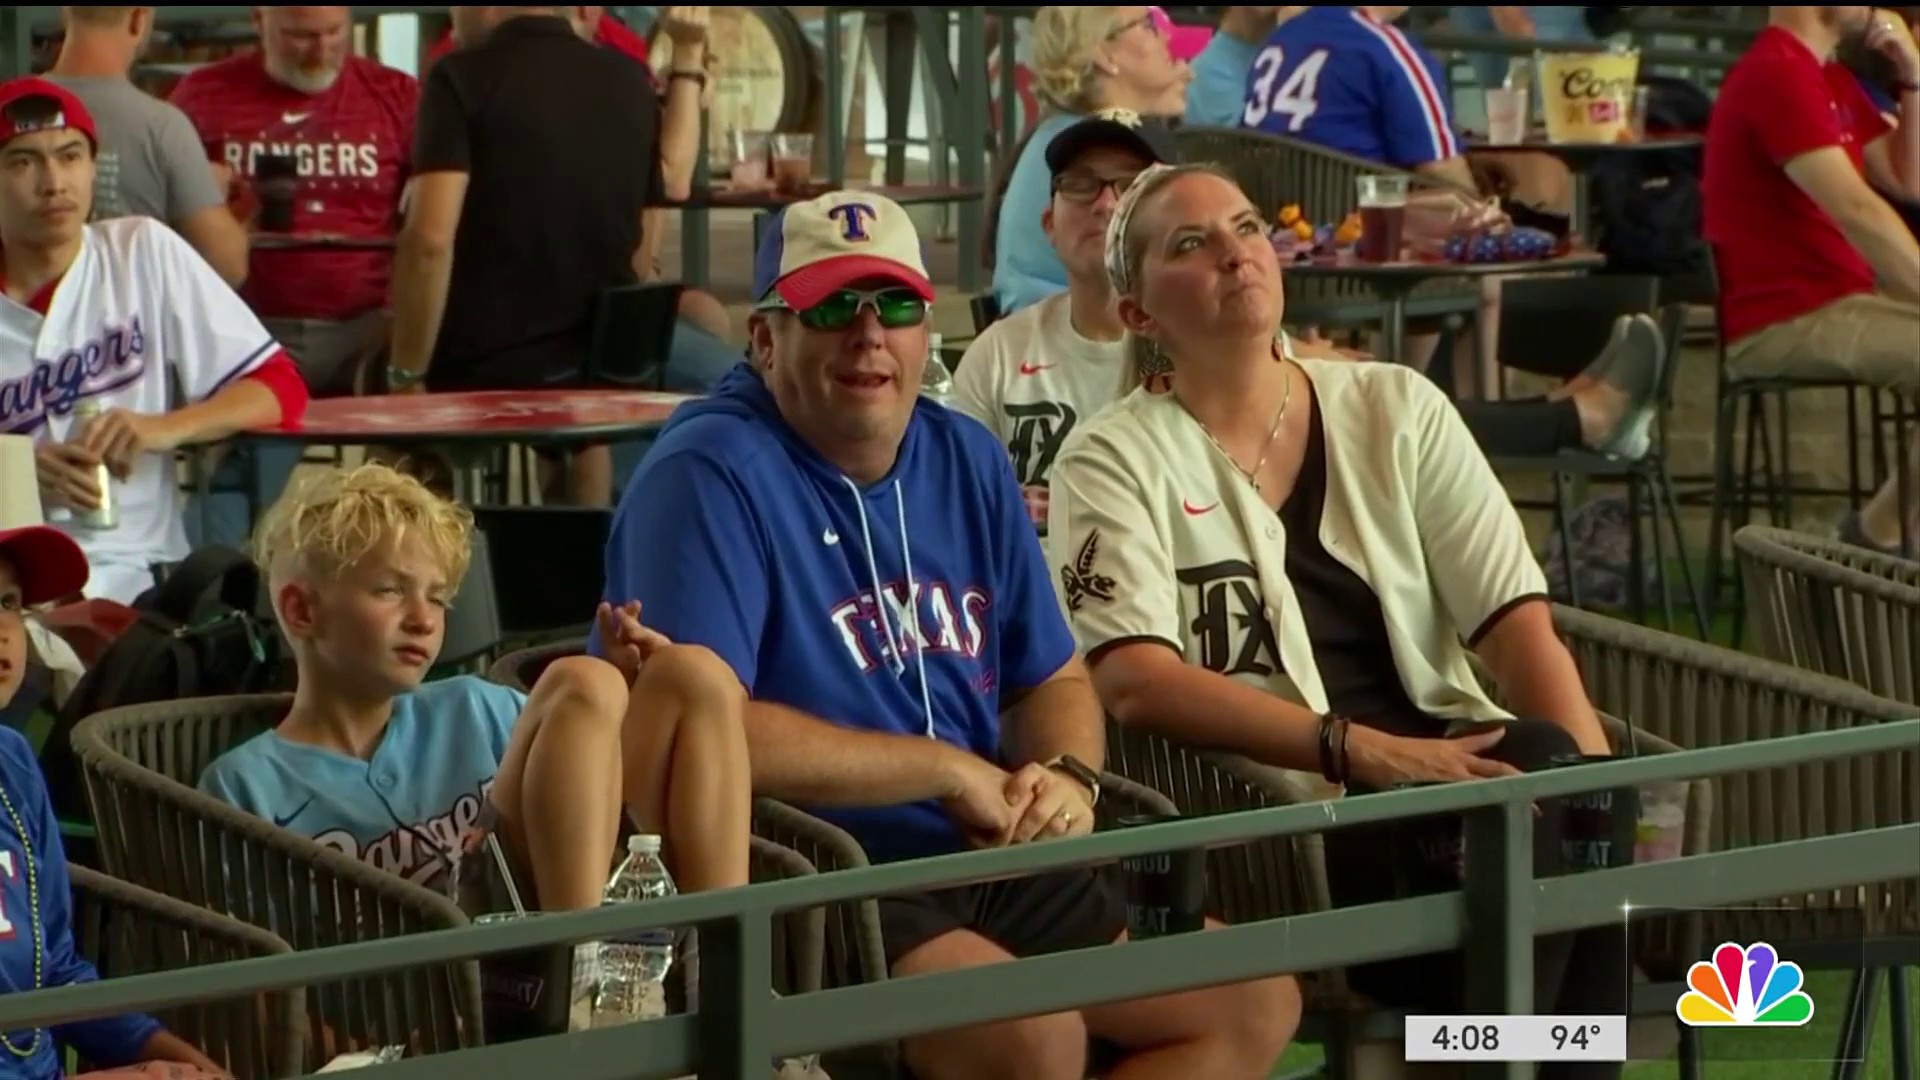 Texas Rangers fans show up for Game 2 of playoffs – NBC 5 Dallas-Fort Worth